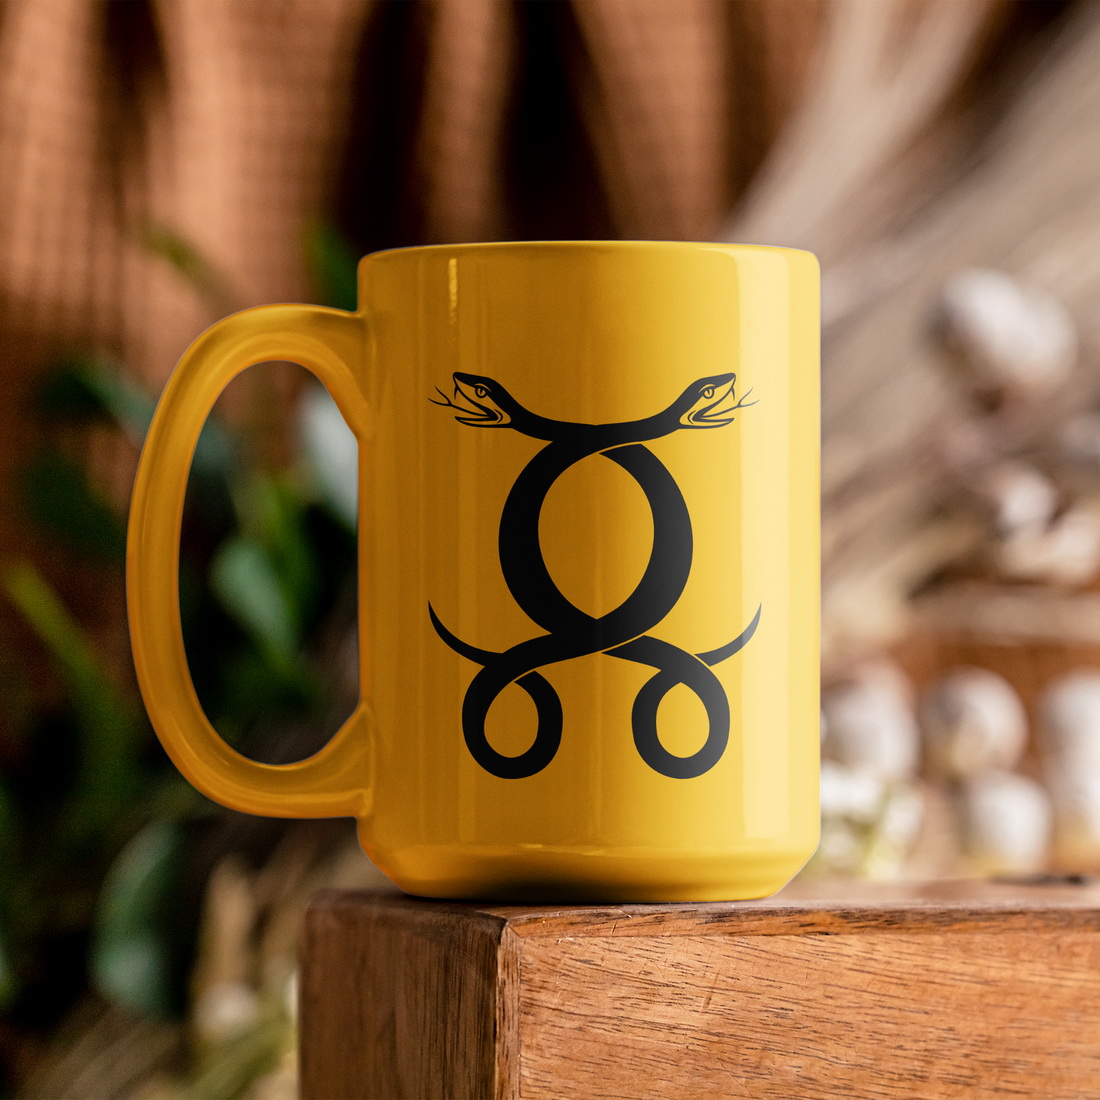 Yellow coffee mug sitting on top of a wooden table.